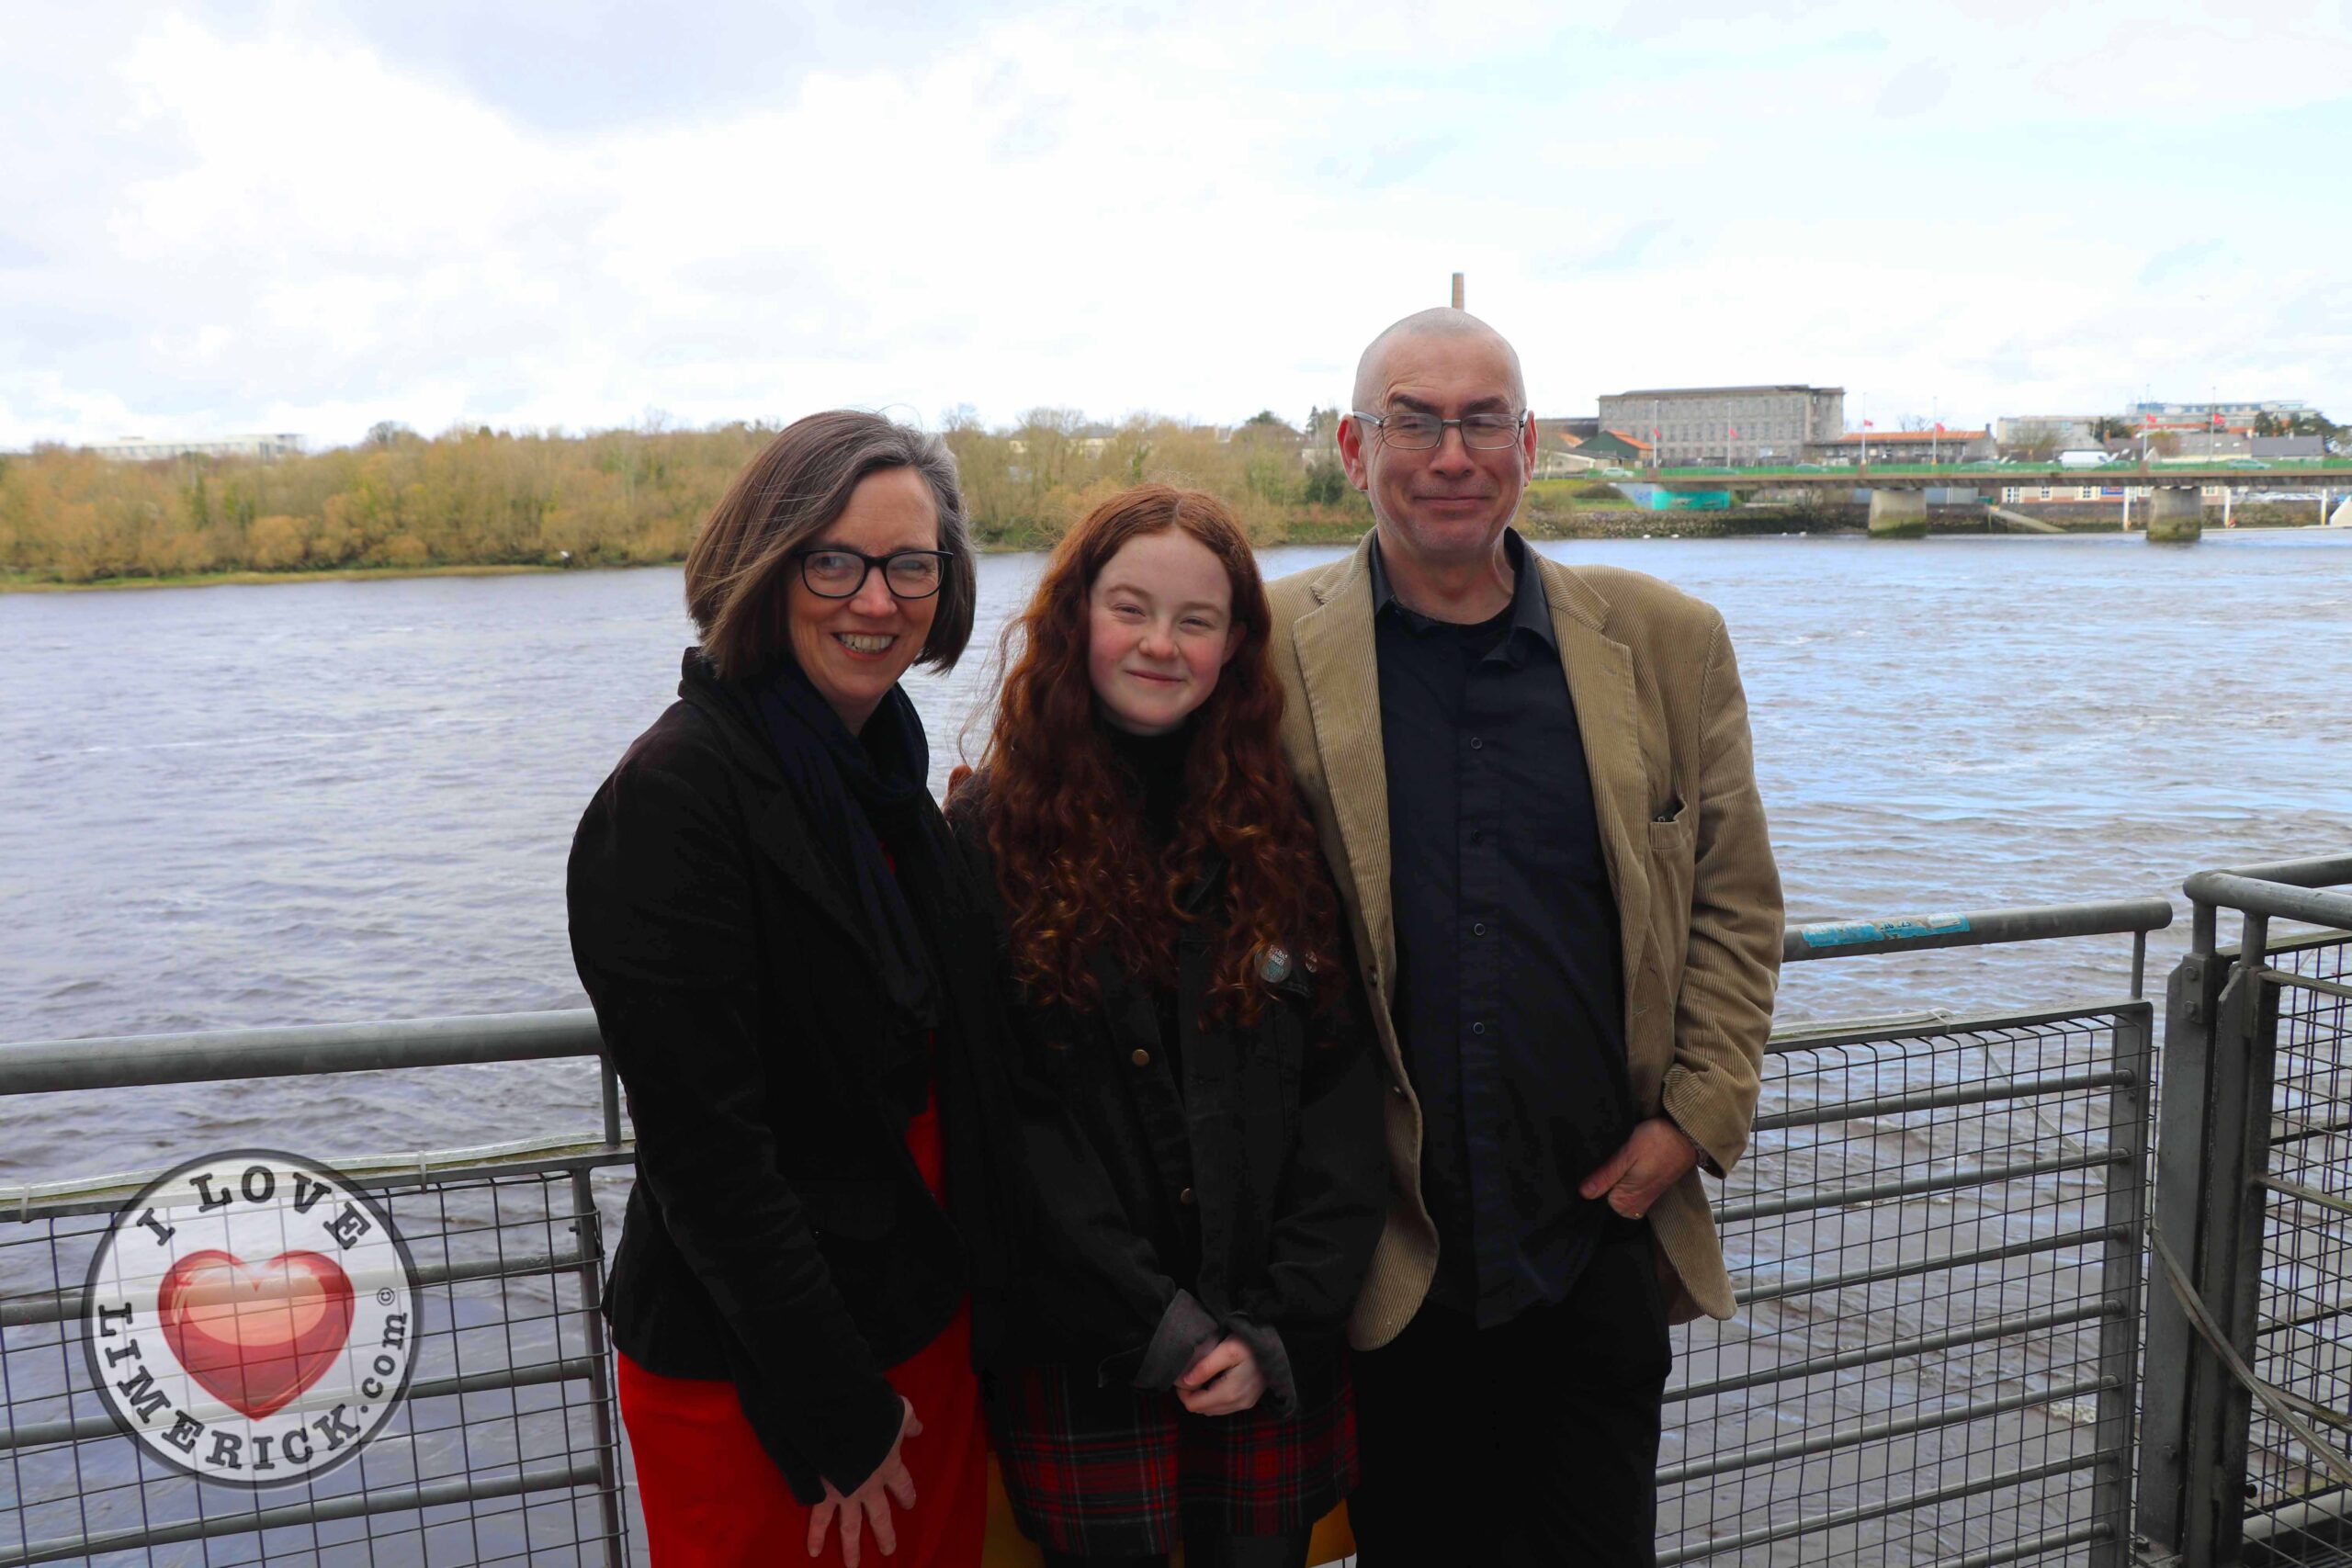 C40 Global Youth - Saoirse Exton has been selected as one of only 14 young climate activists worldwide to be part of the inaugural C40 Global Youth and Mayors' Forum. Saorise pictured above with her parents. Picture: ilovelimerick